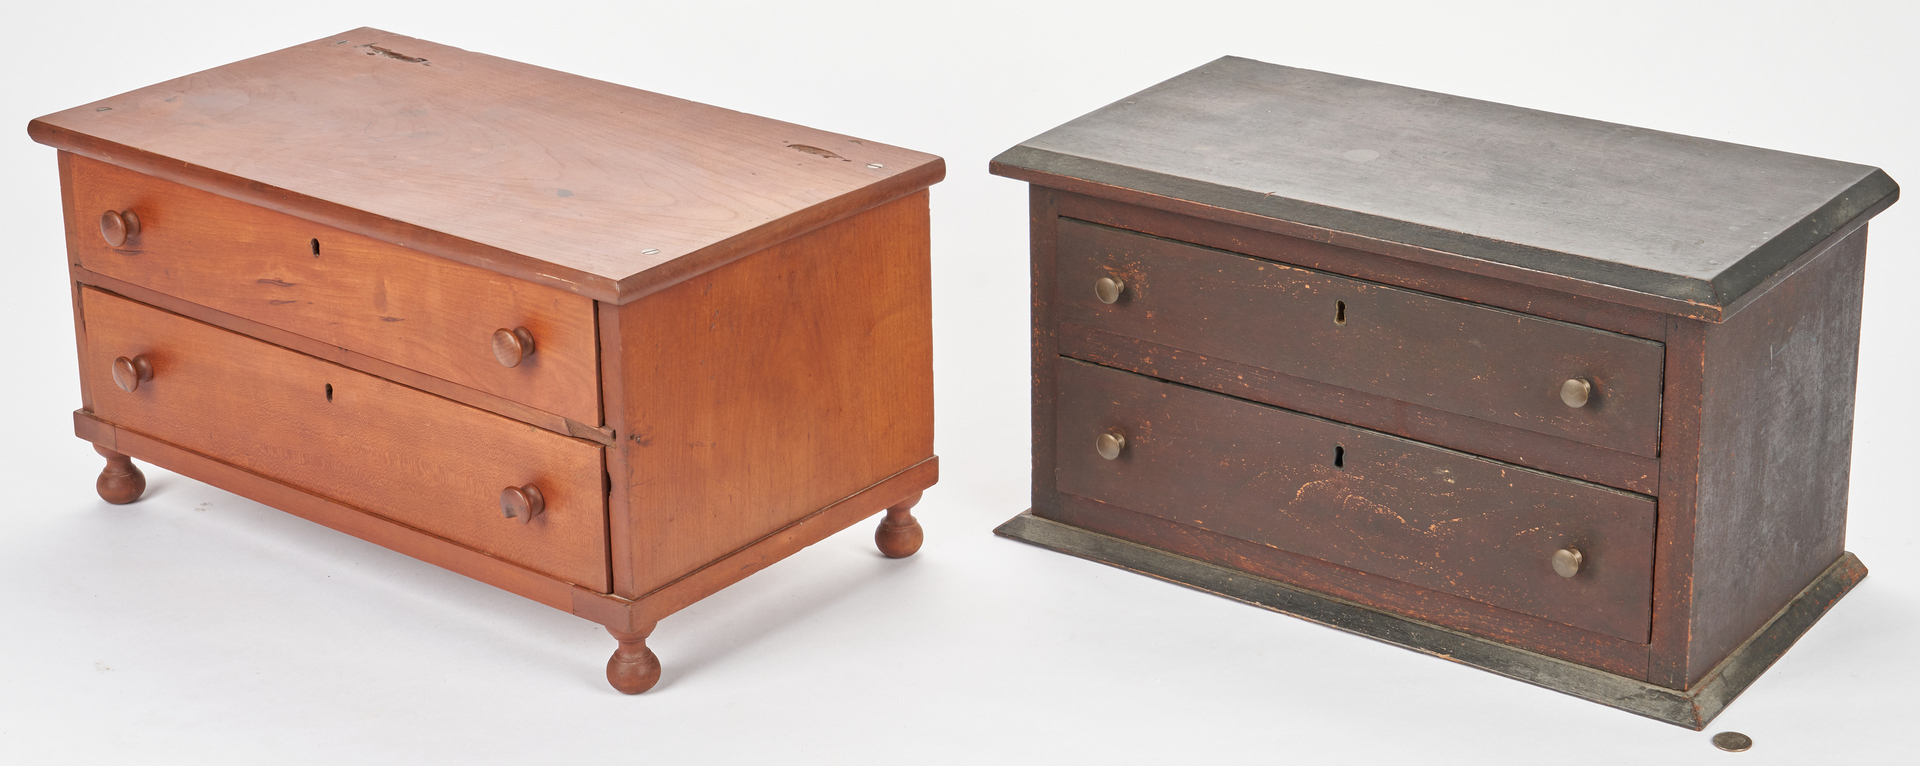 Lot 363: 2 Southern Cherry and Walnut Two-Drawer Storage Cabinets